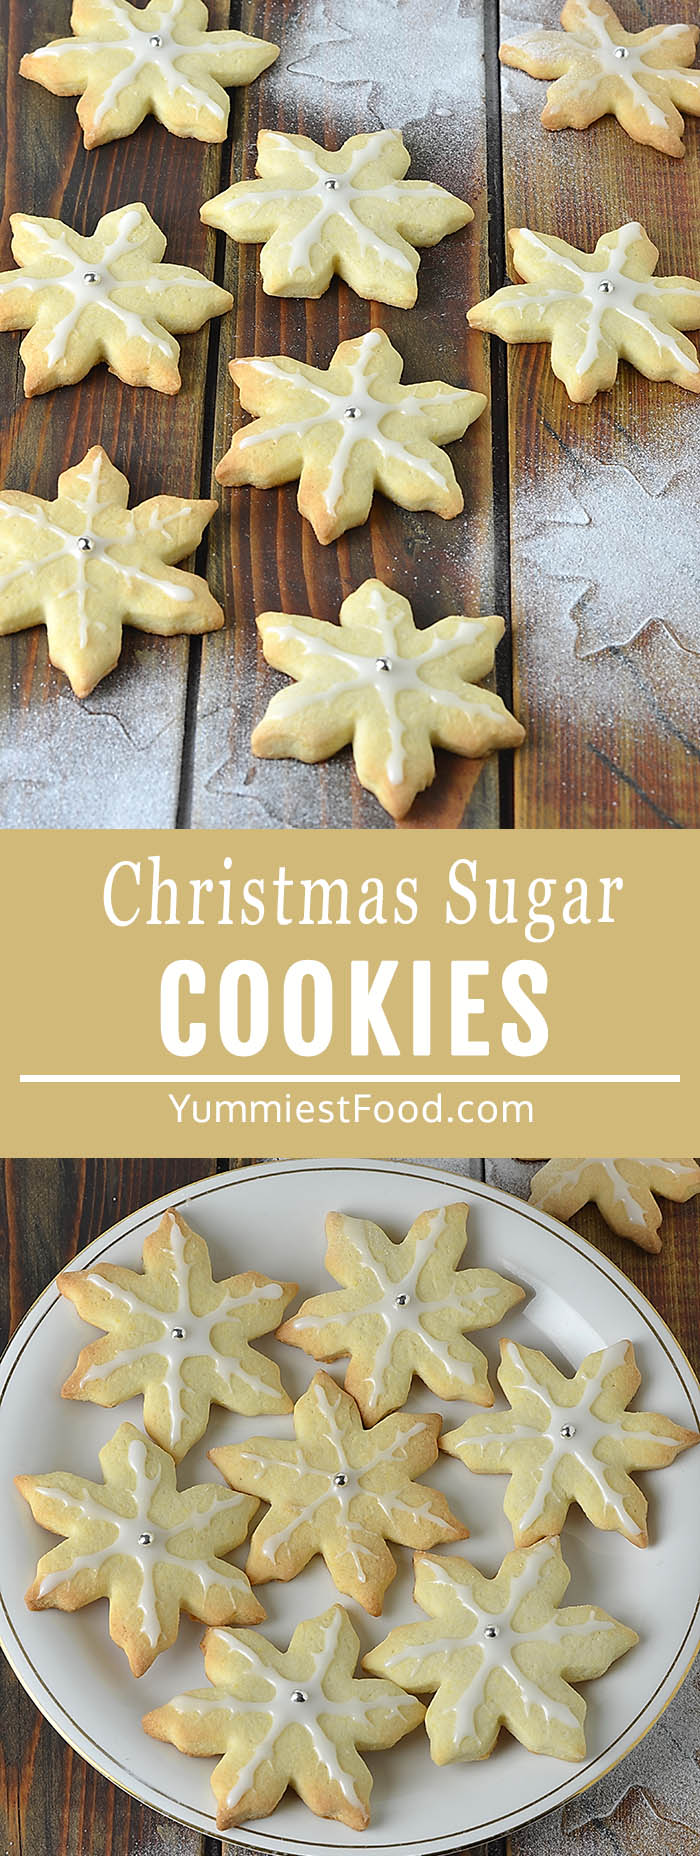 Christmas Sugar Cookies are a festive and easy sugar cookie recipe that is fun to bake and eat! Simple homemade sugar cookie dough is cut into snowflake shapes and then decorated with delicious icing! Perfect for any holiday cookie tray, and so easy to make